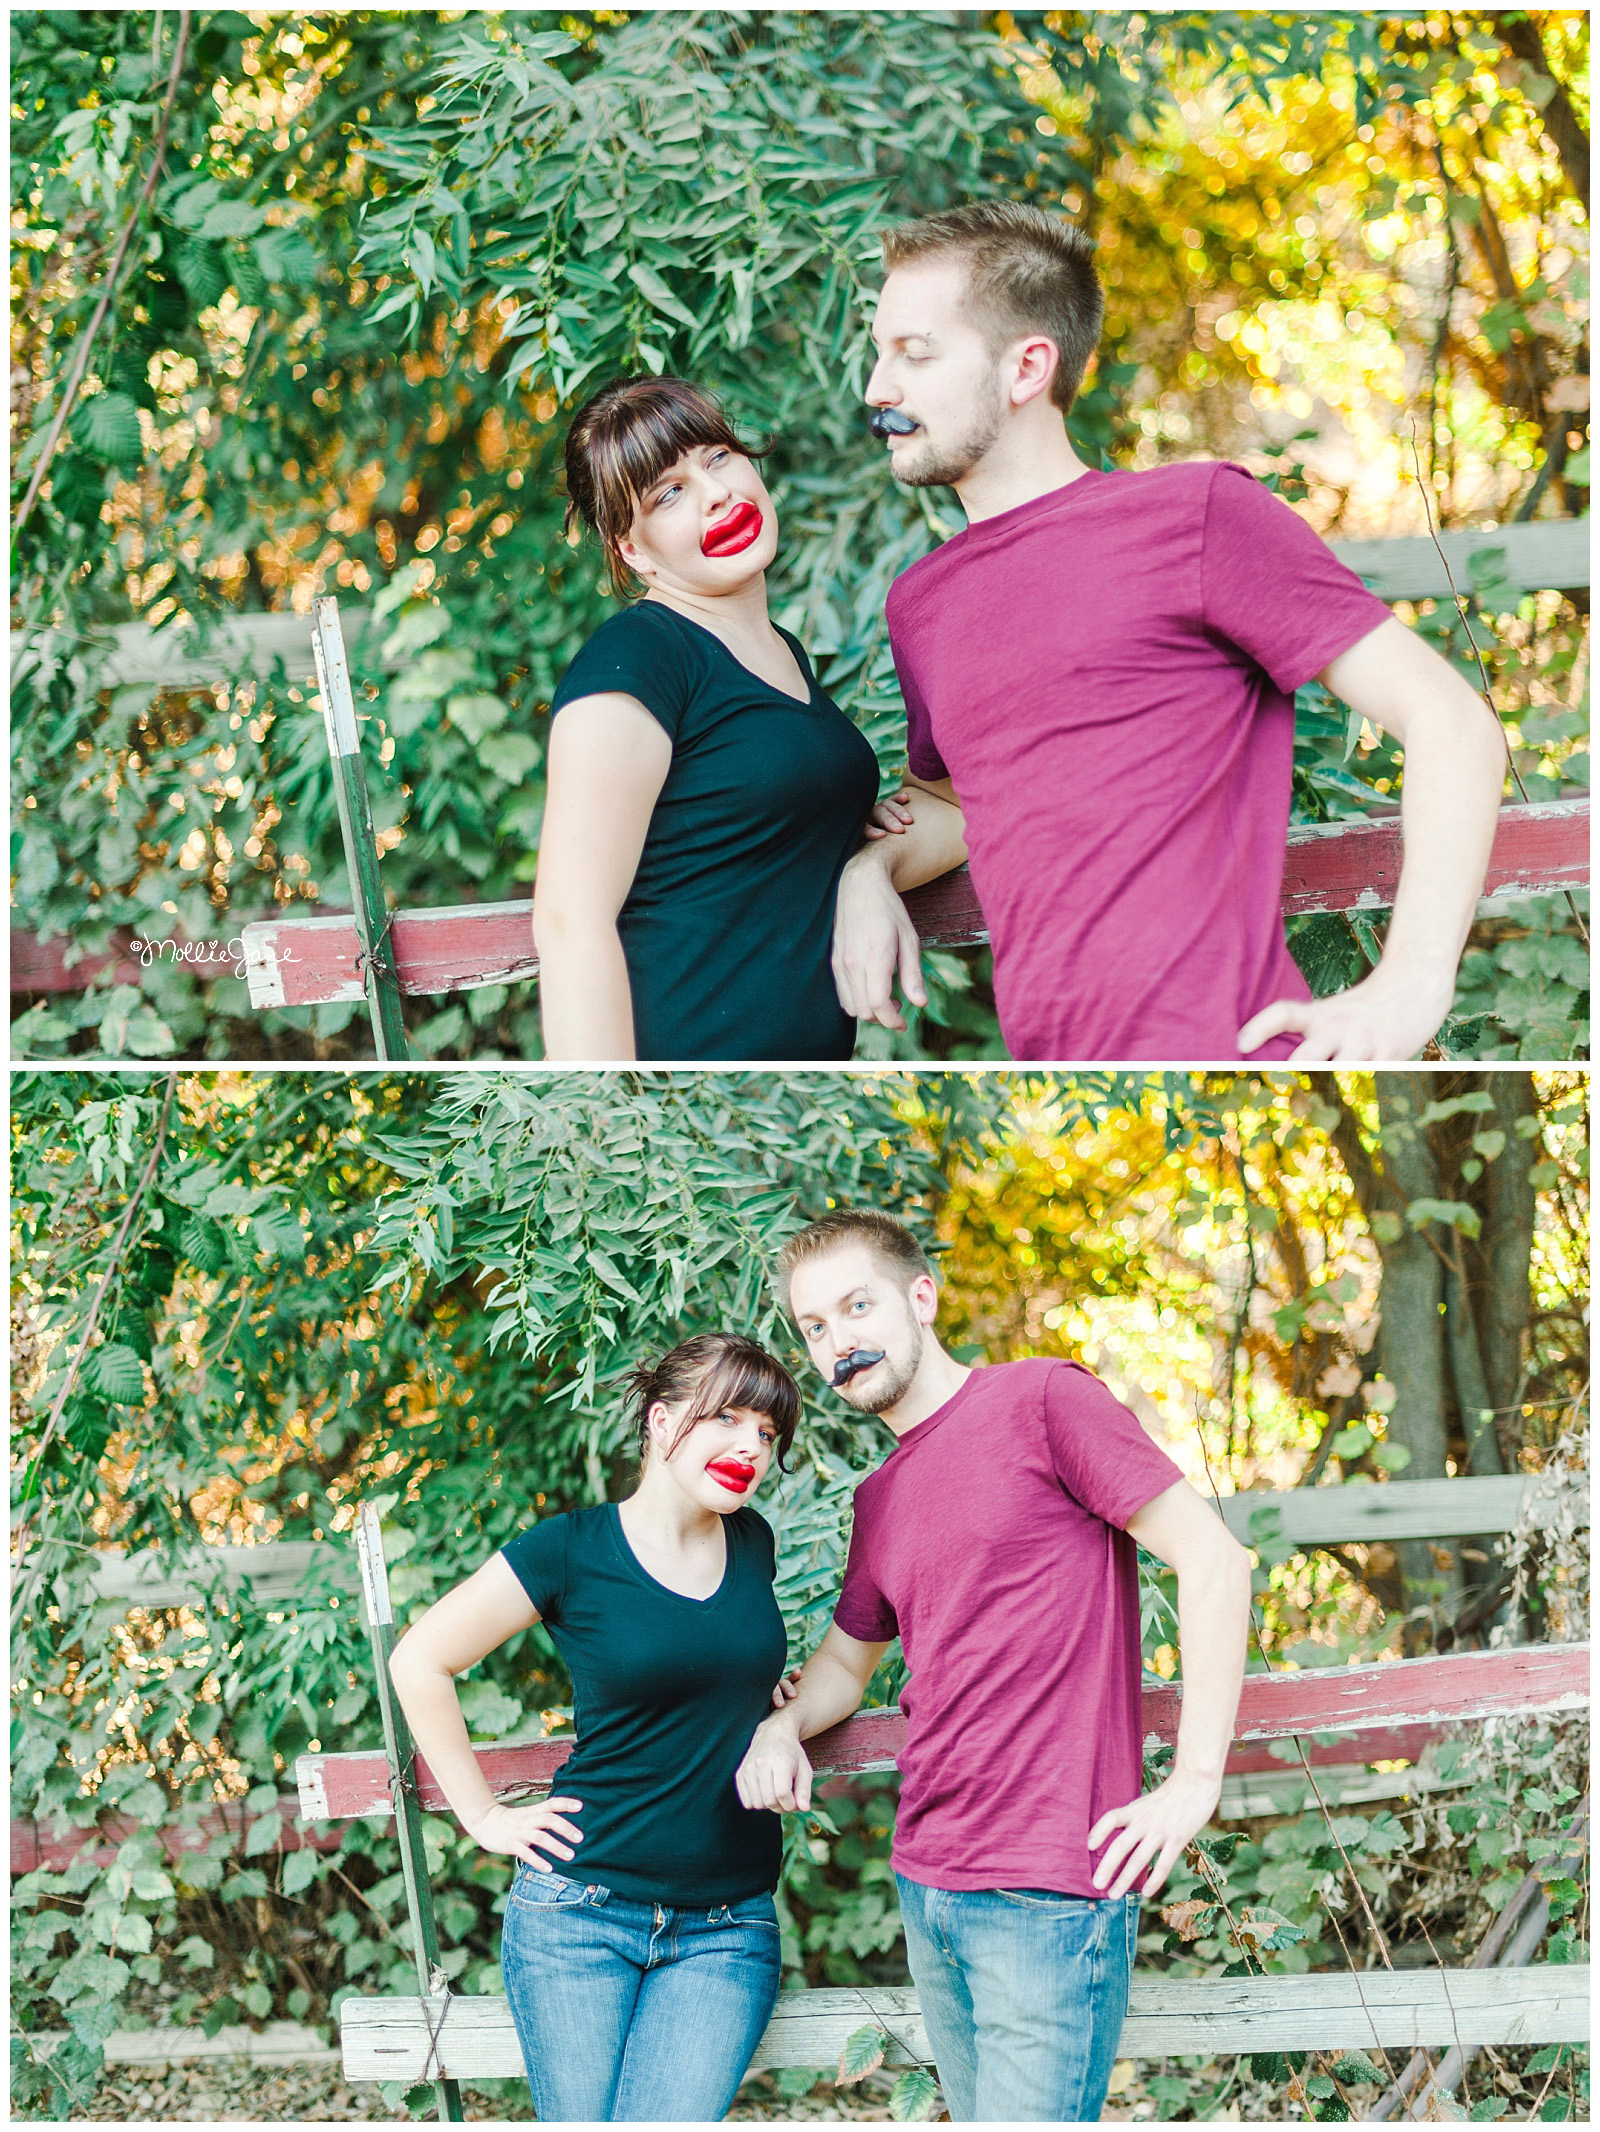 Halloween Engagement Session, Irvine Wedding Photographer.  Photography by Mollie Jane Photography.  To see more of this session, go to www.molliejanephotography.com